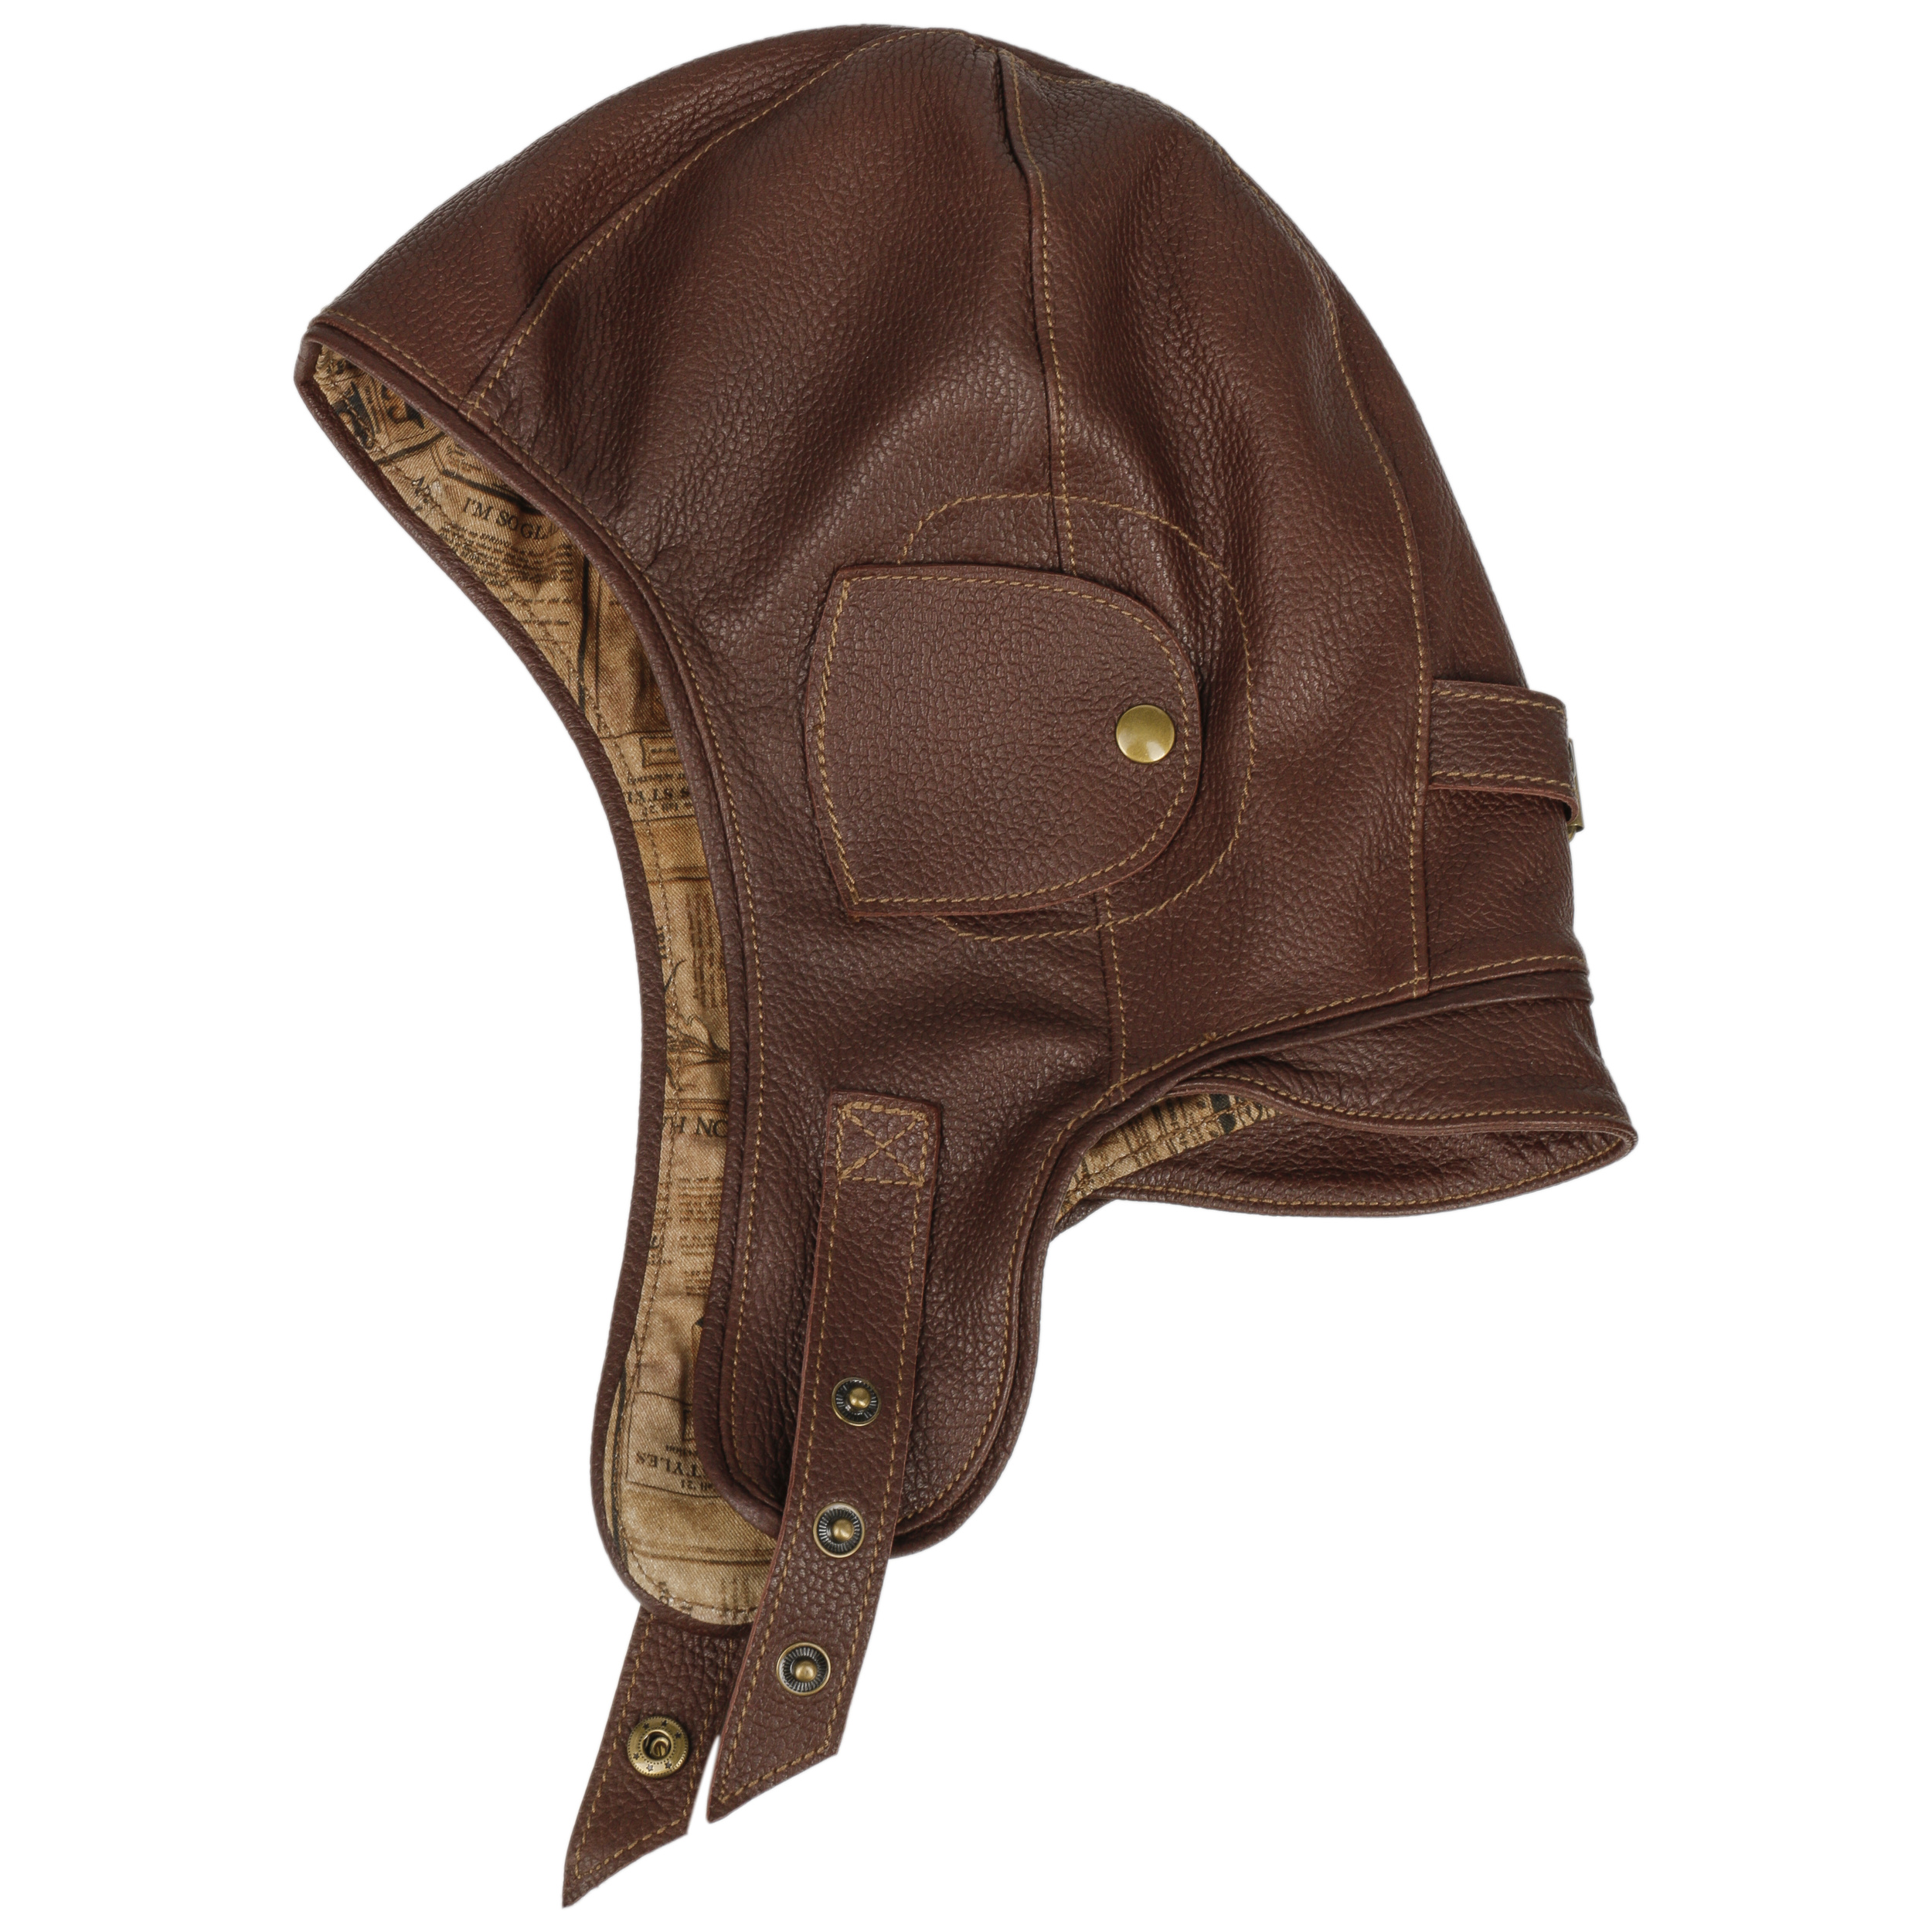 Classic Convertible Aviator Hat by Stetson